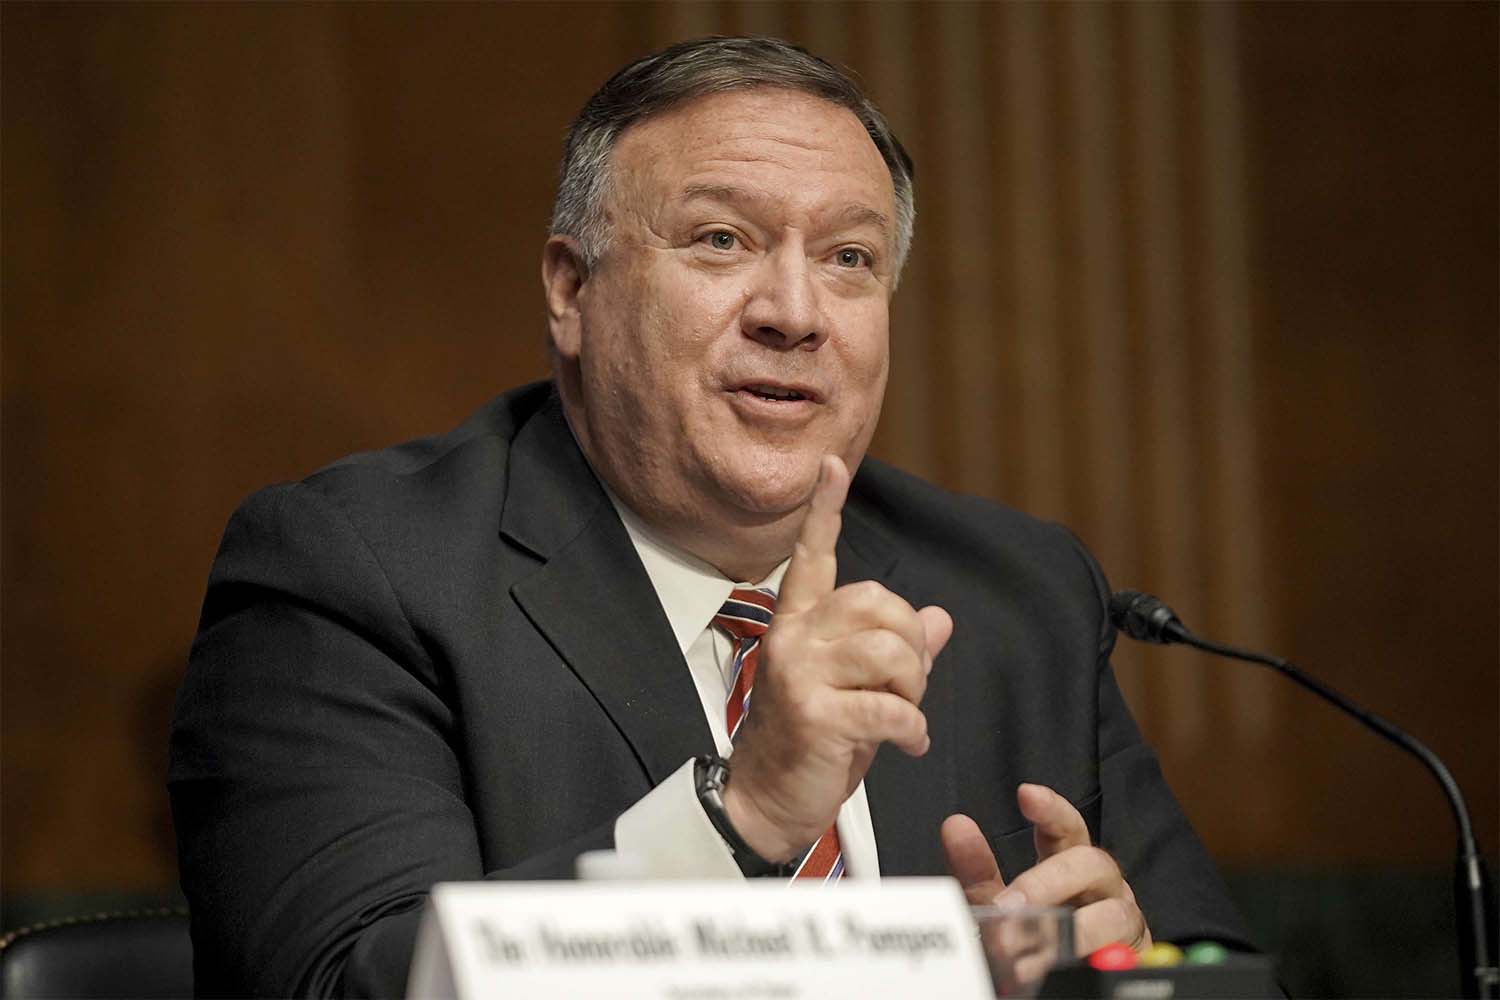 The sanctions target 22 specific materials that Pompeo said were used in connection with Iran's nuclear, military or ballistic missile programs.